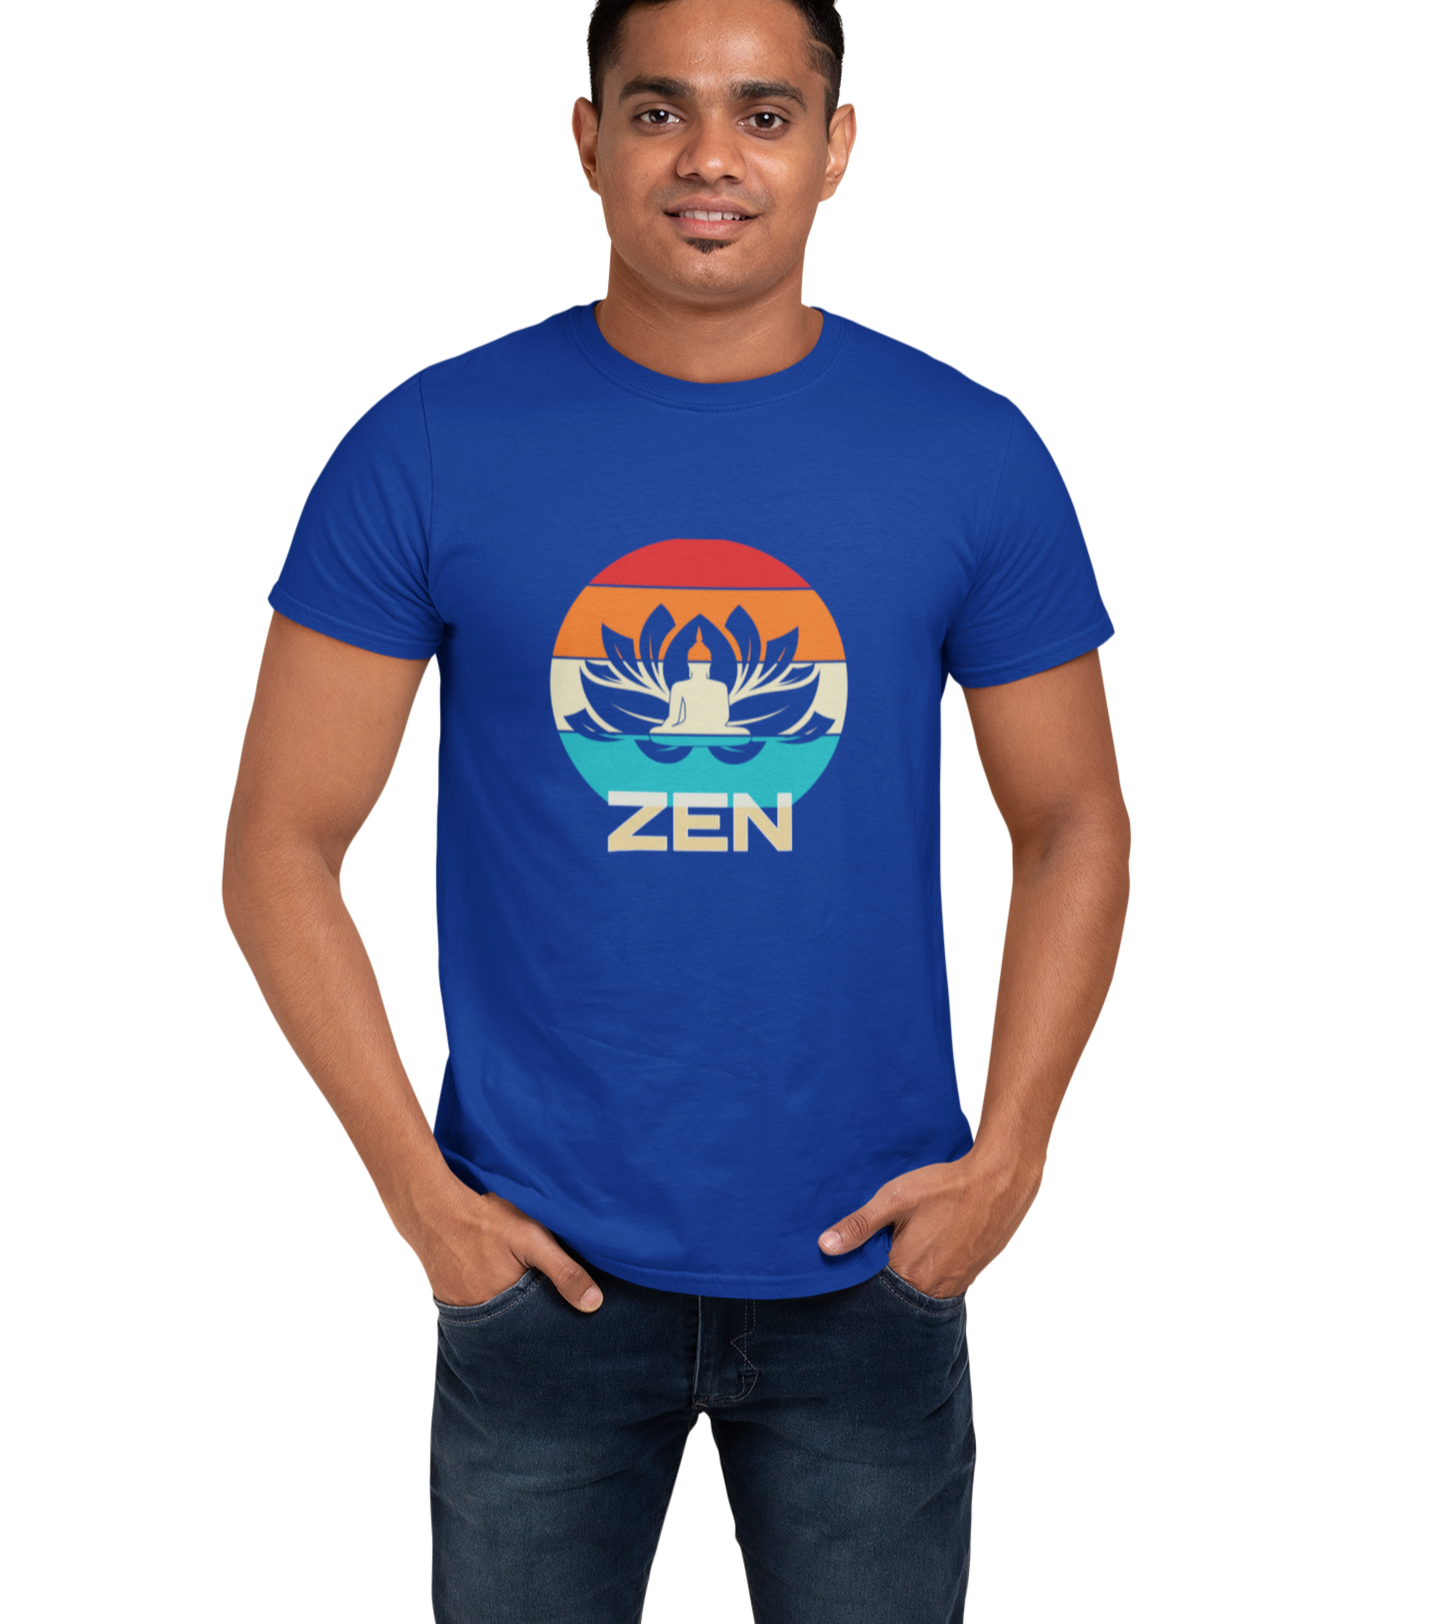 Yoga t-shirt for Men, Royal Blue color. printed with image of Buddha.